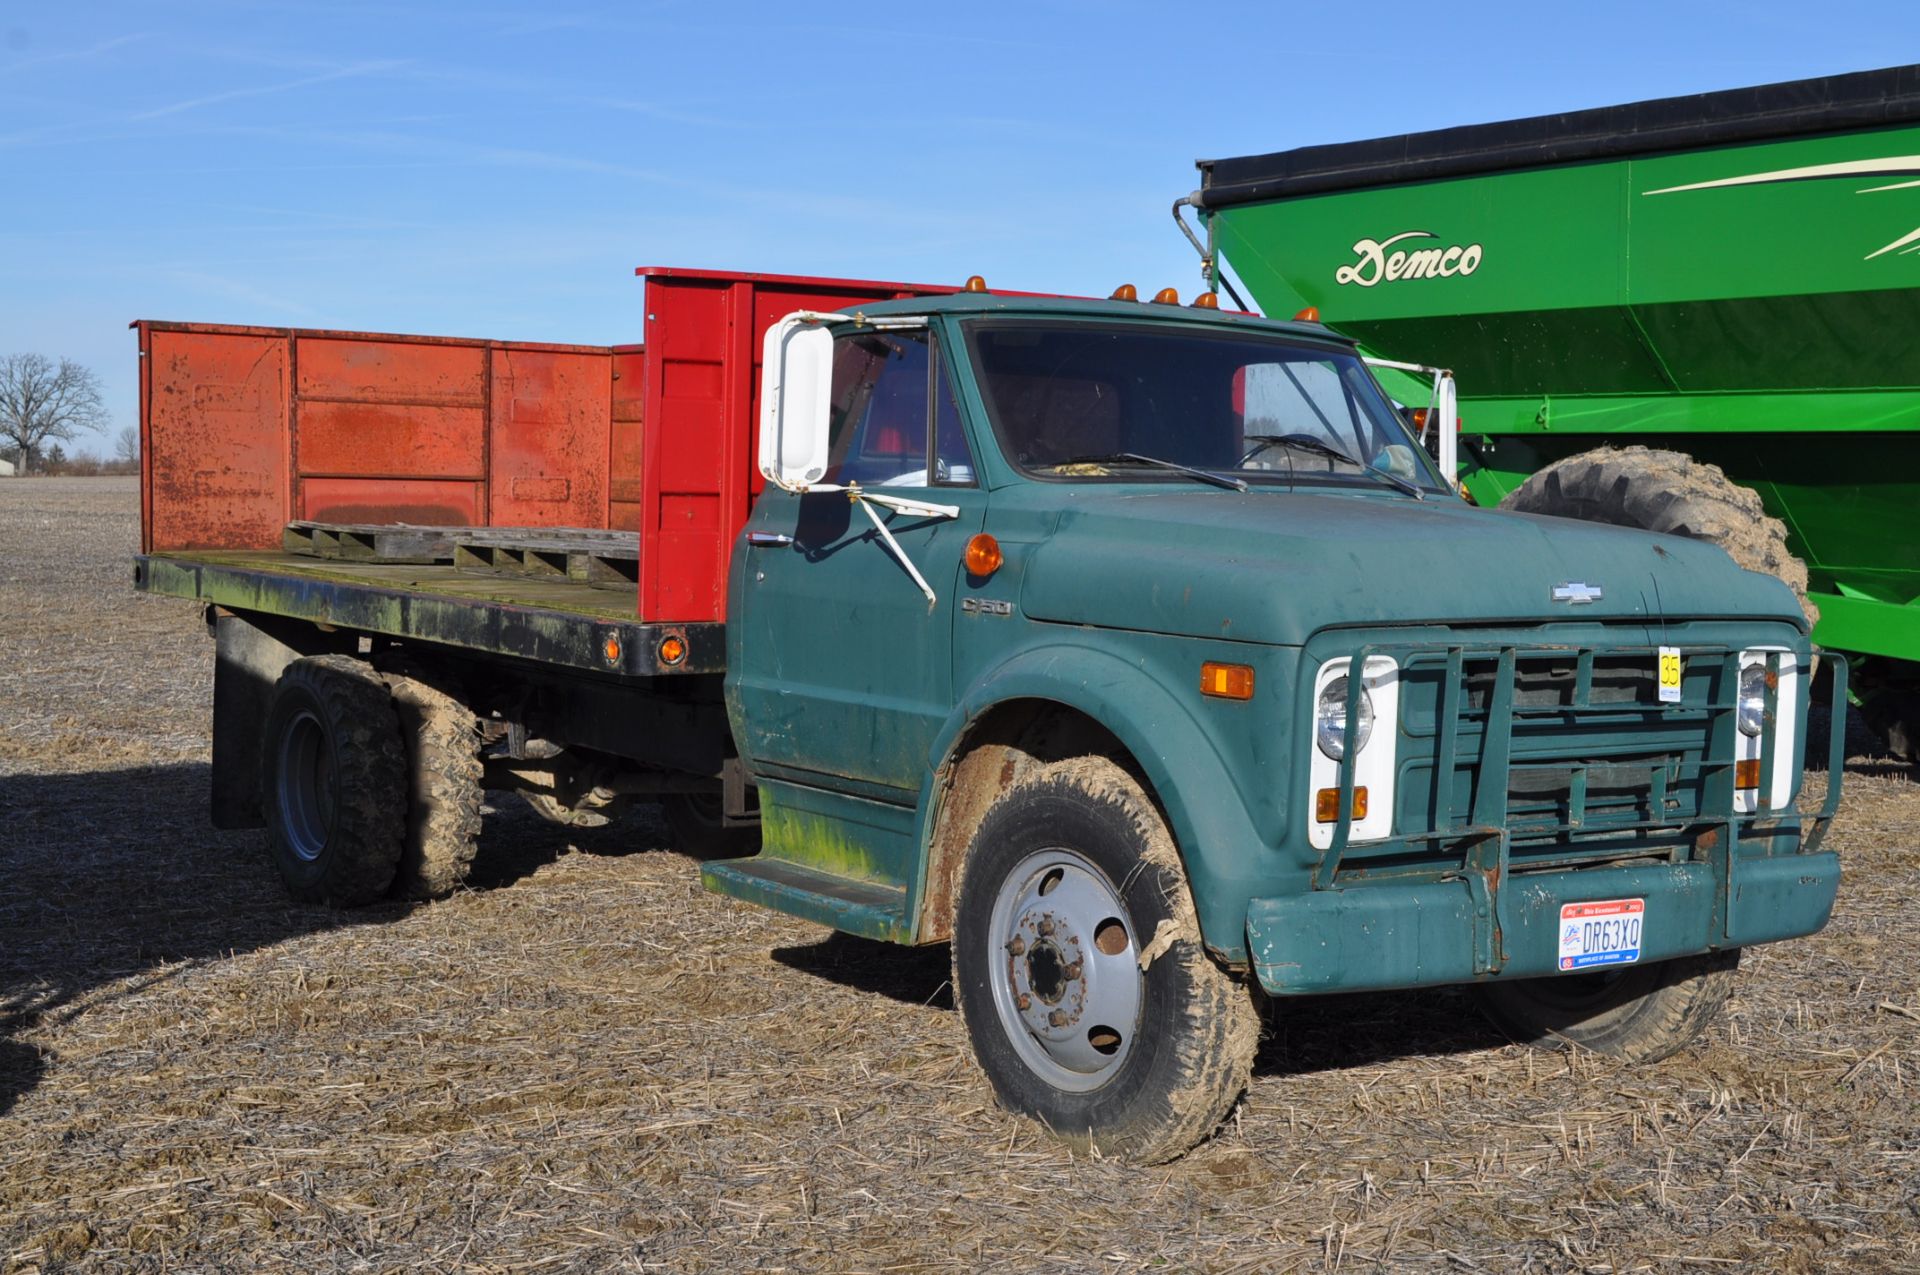 1972 Chevrolet C50 straight truck, V8 gas 350 engine, 5+2, hyd brakes, 8.25-20 tires, 15’ bed w/